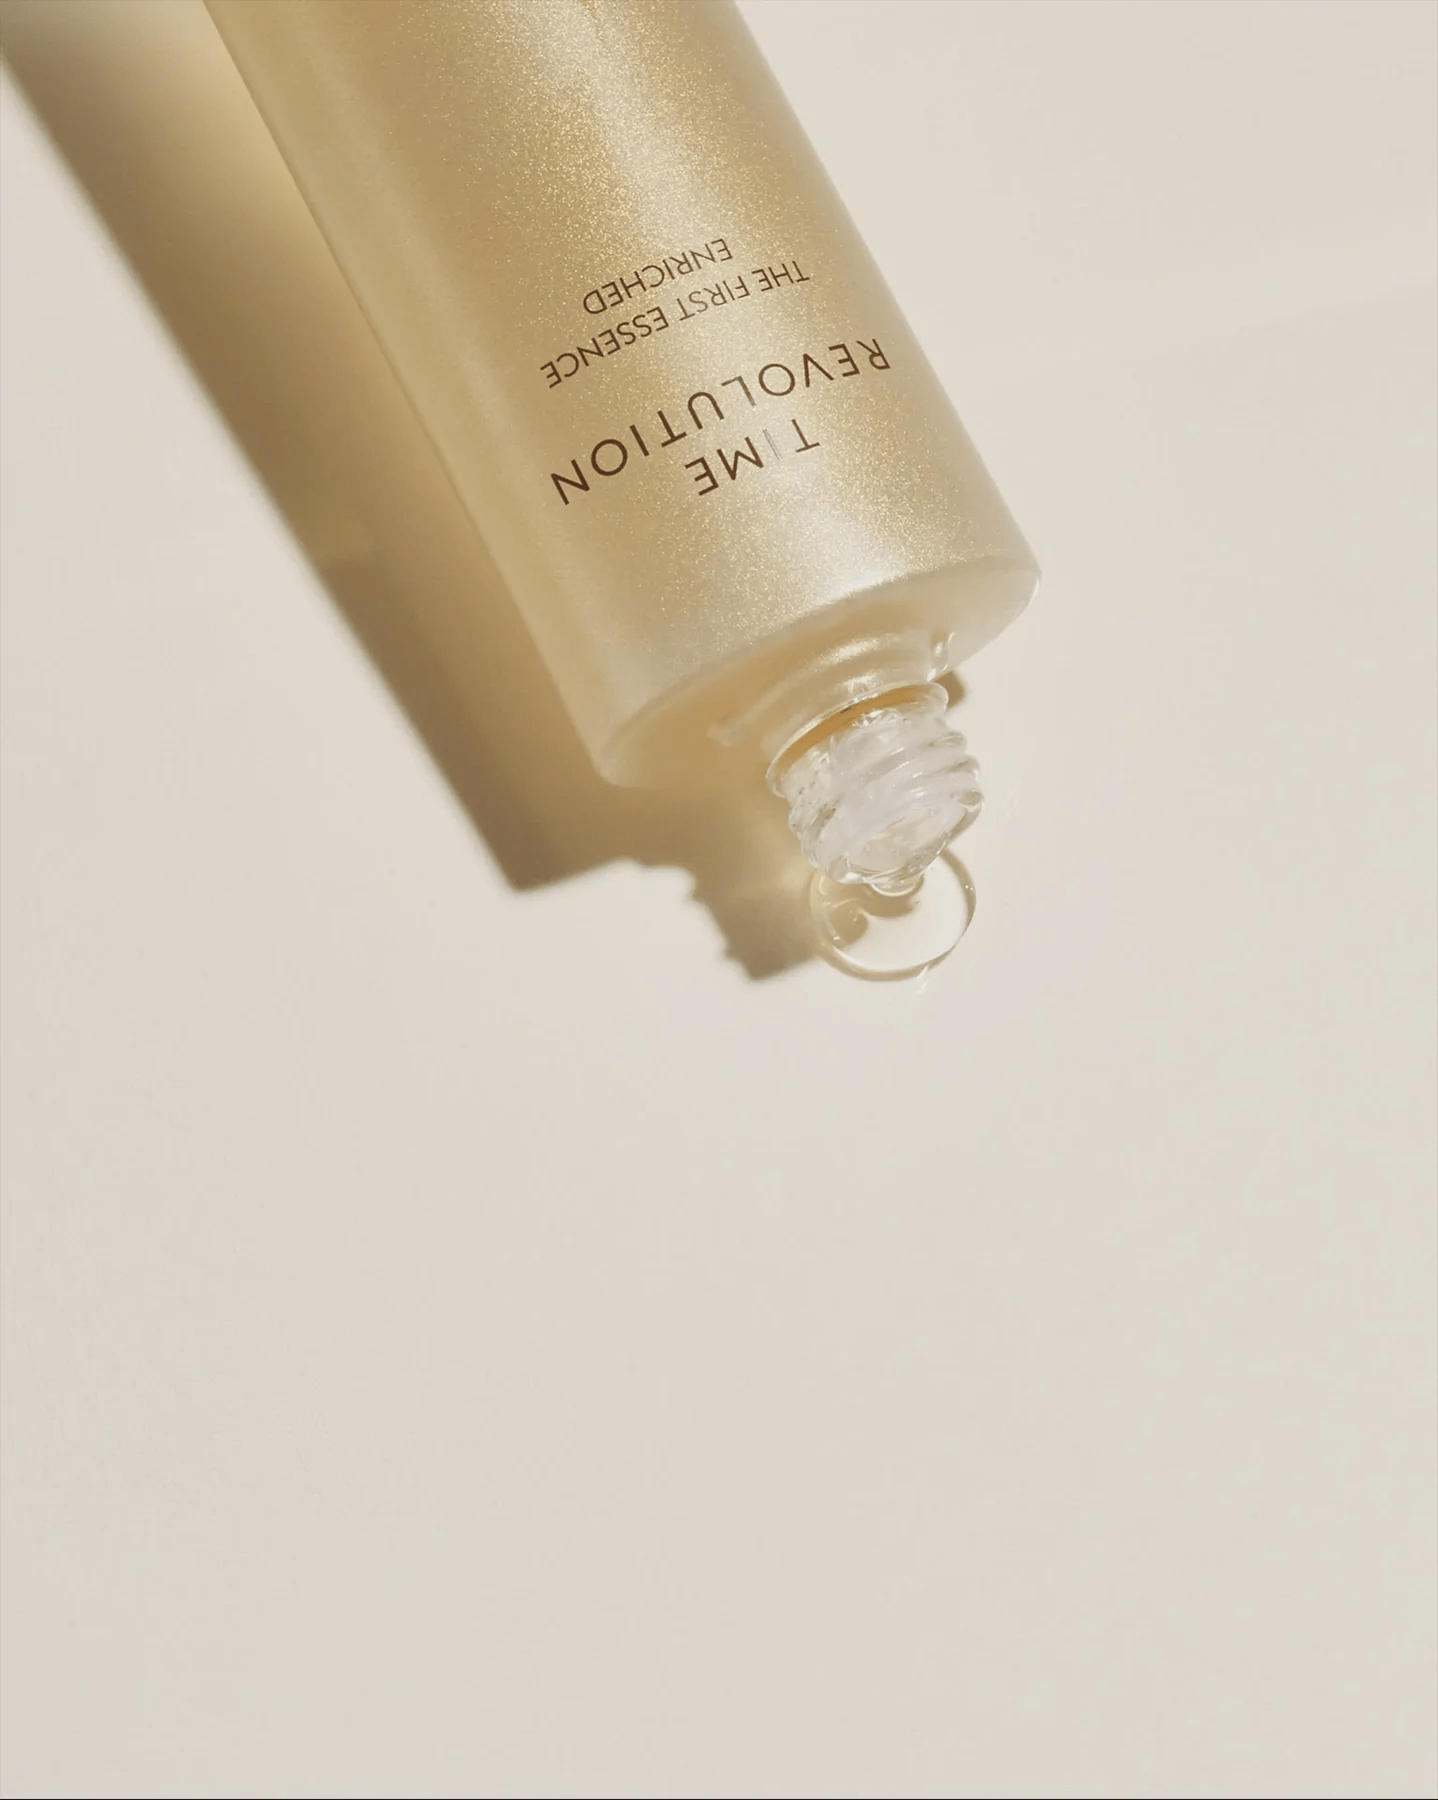 skincare-kbeauty-glowtime-missha time revolution the first essence enriched